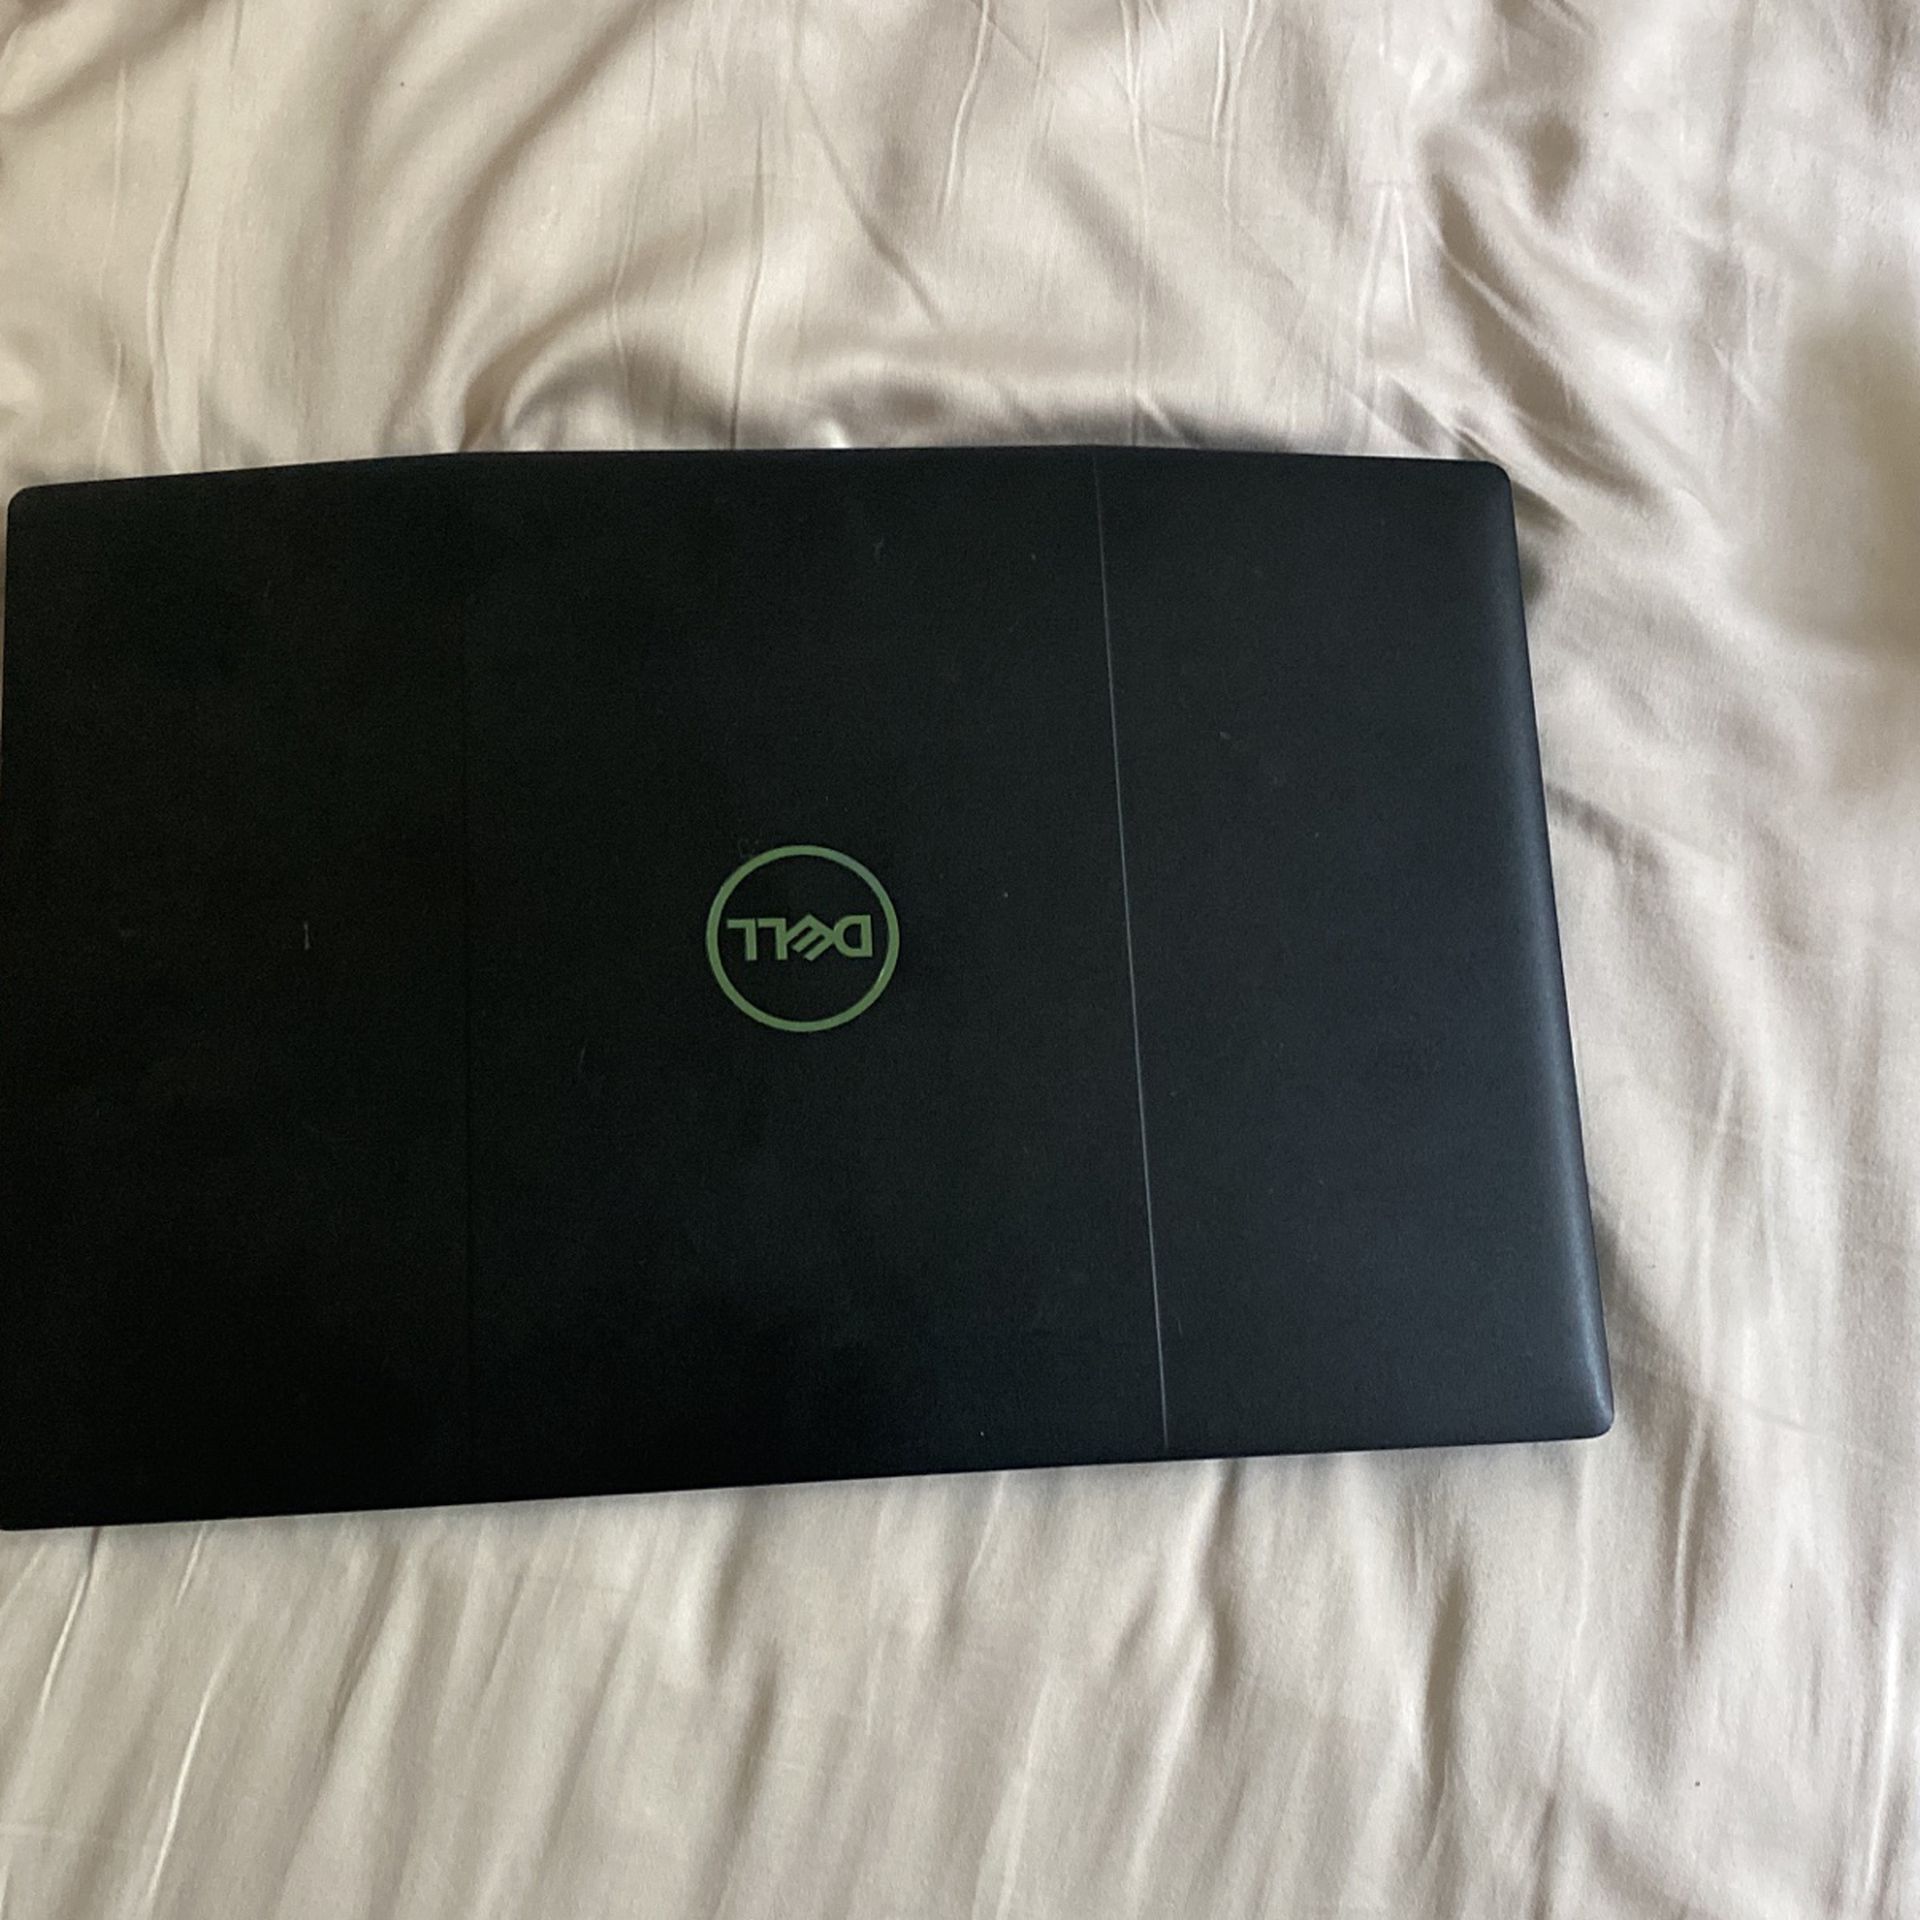 Dell G3 Gaming Laptop 